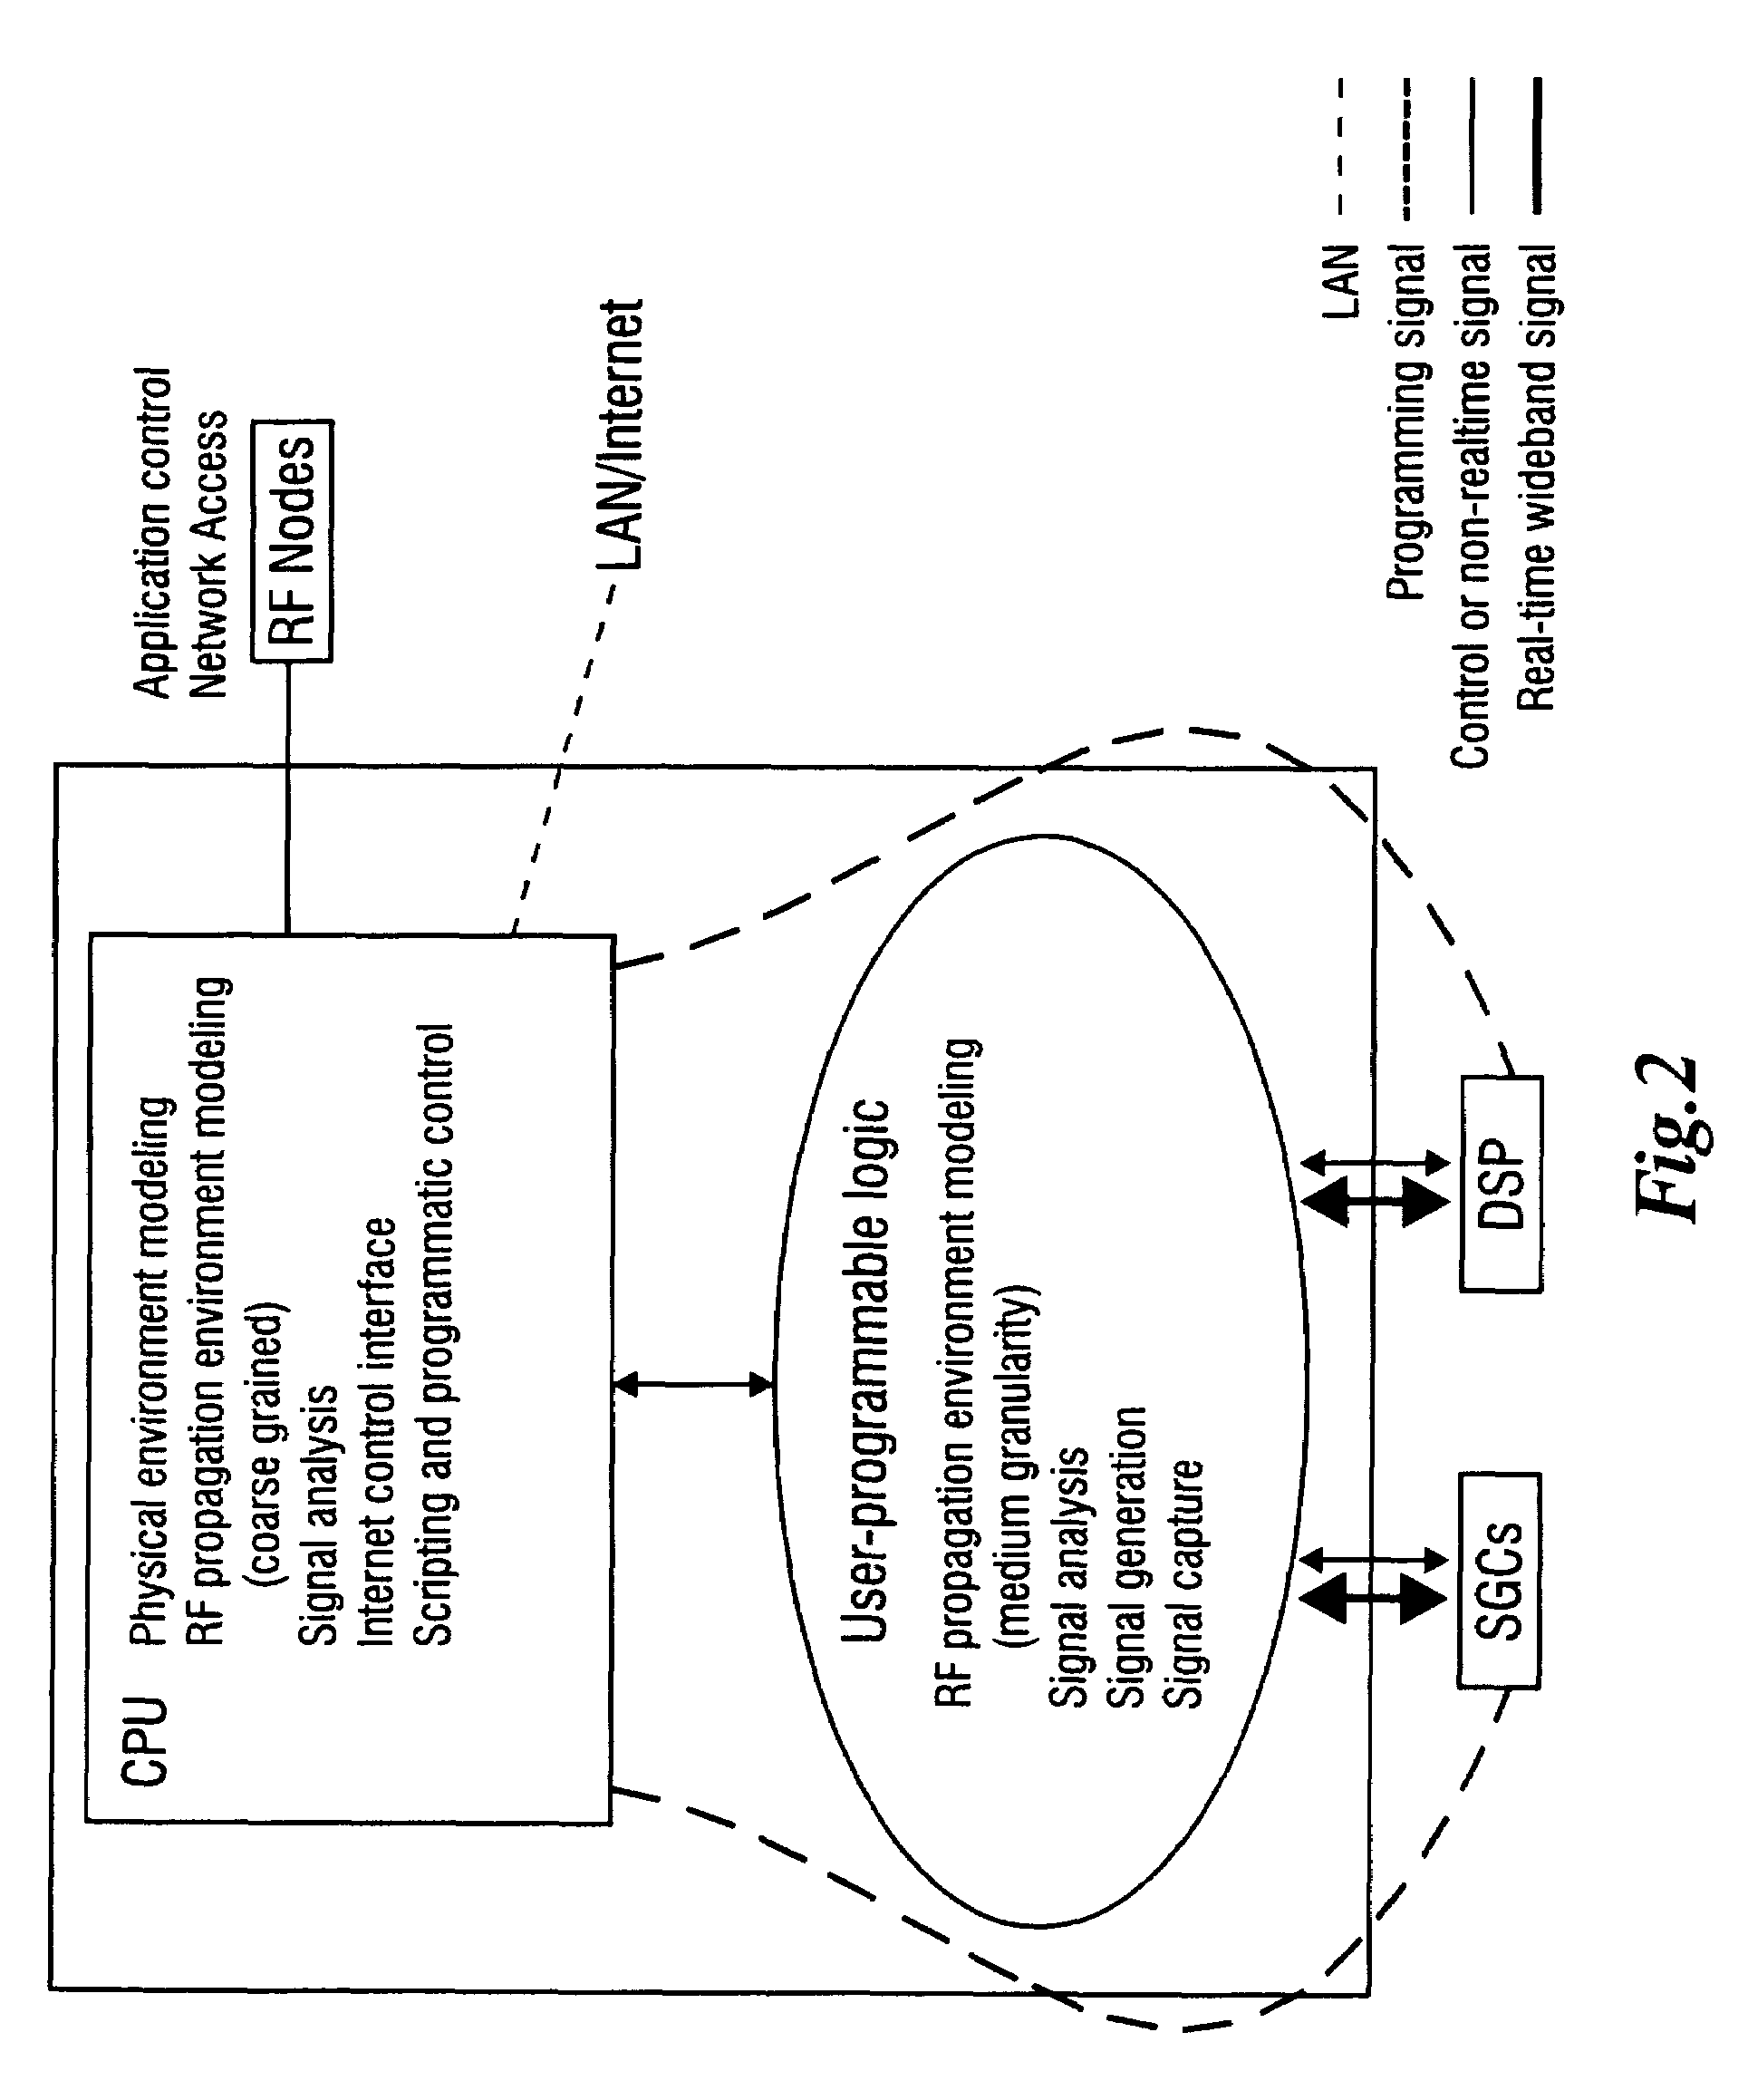 Device and method for programmable wideband network emulation